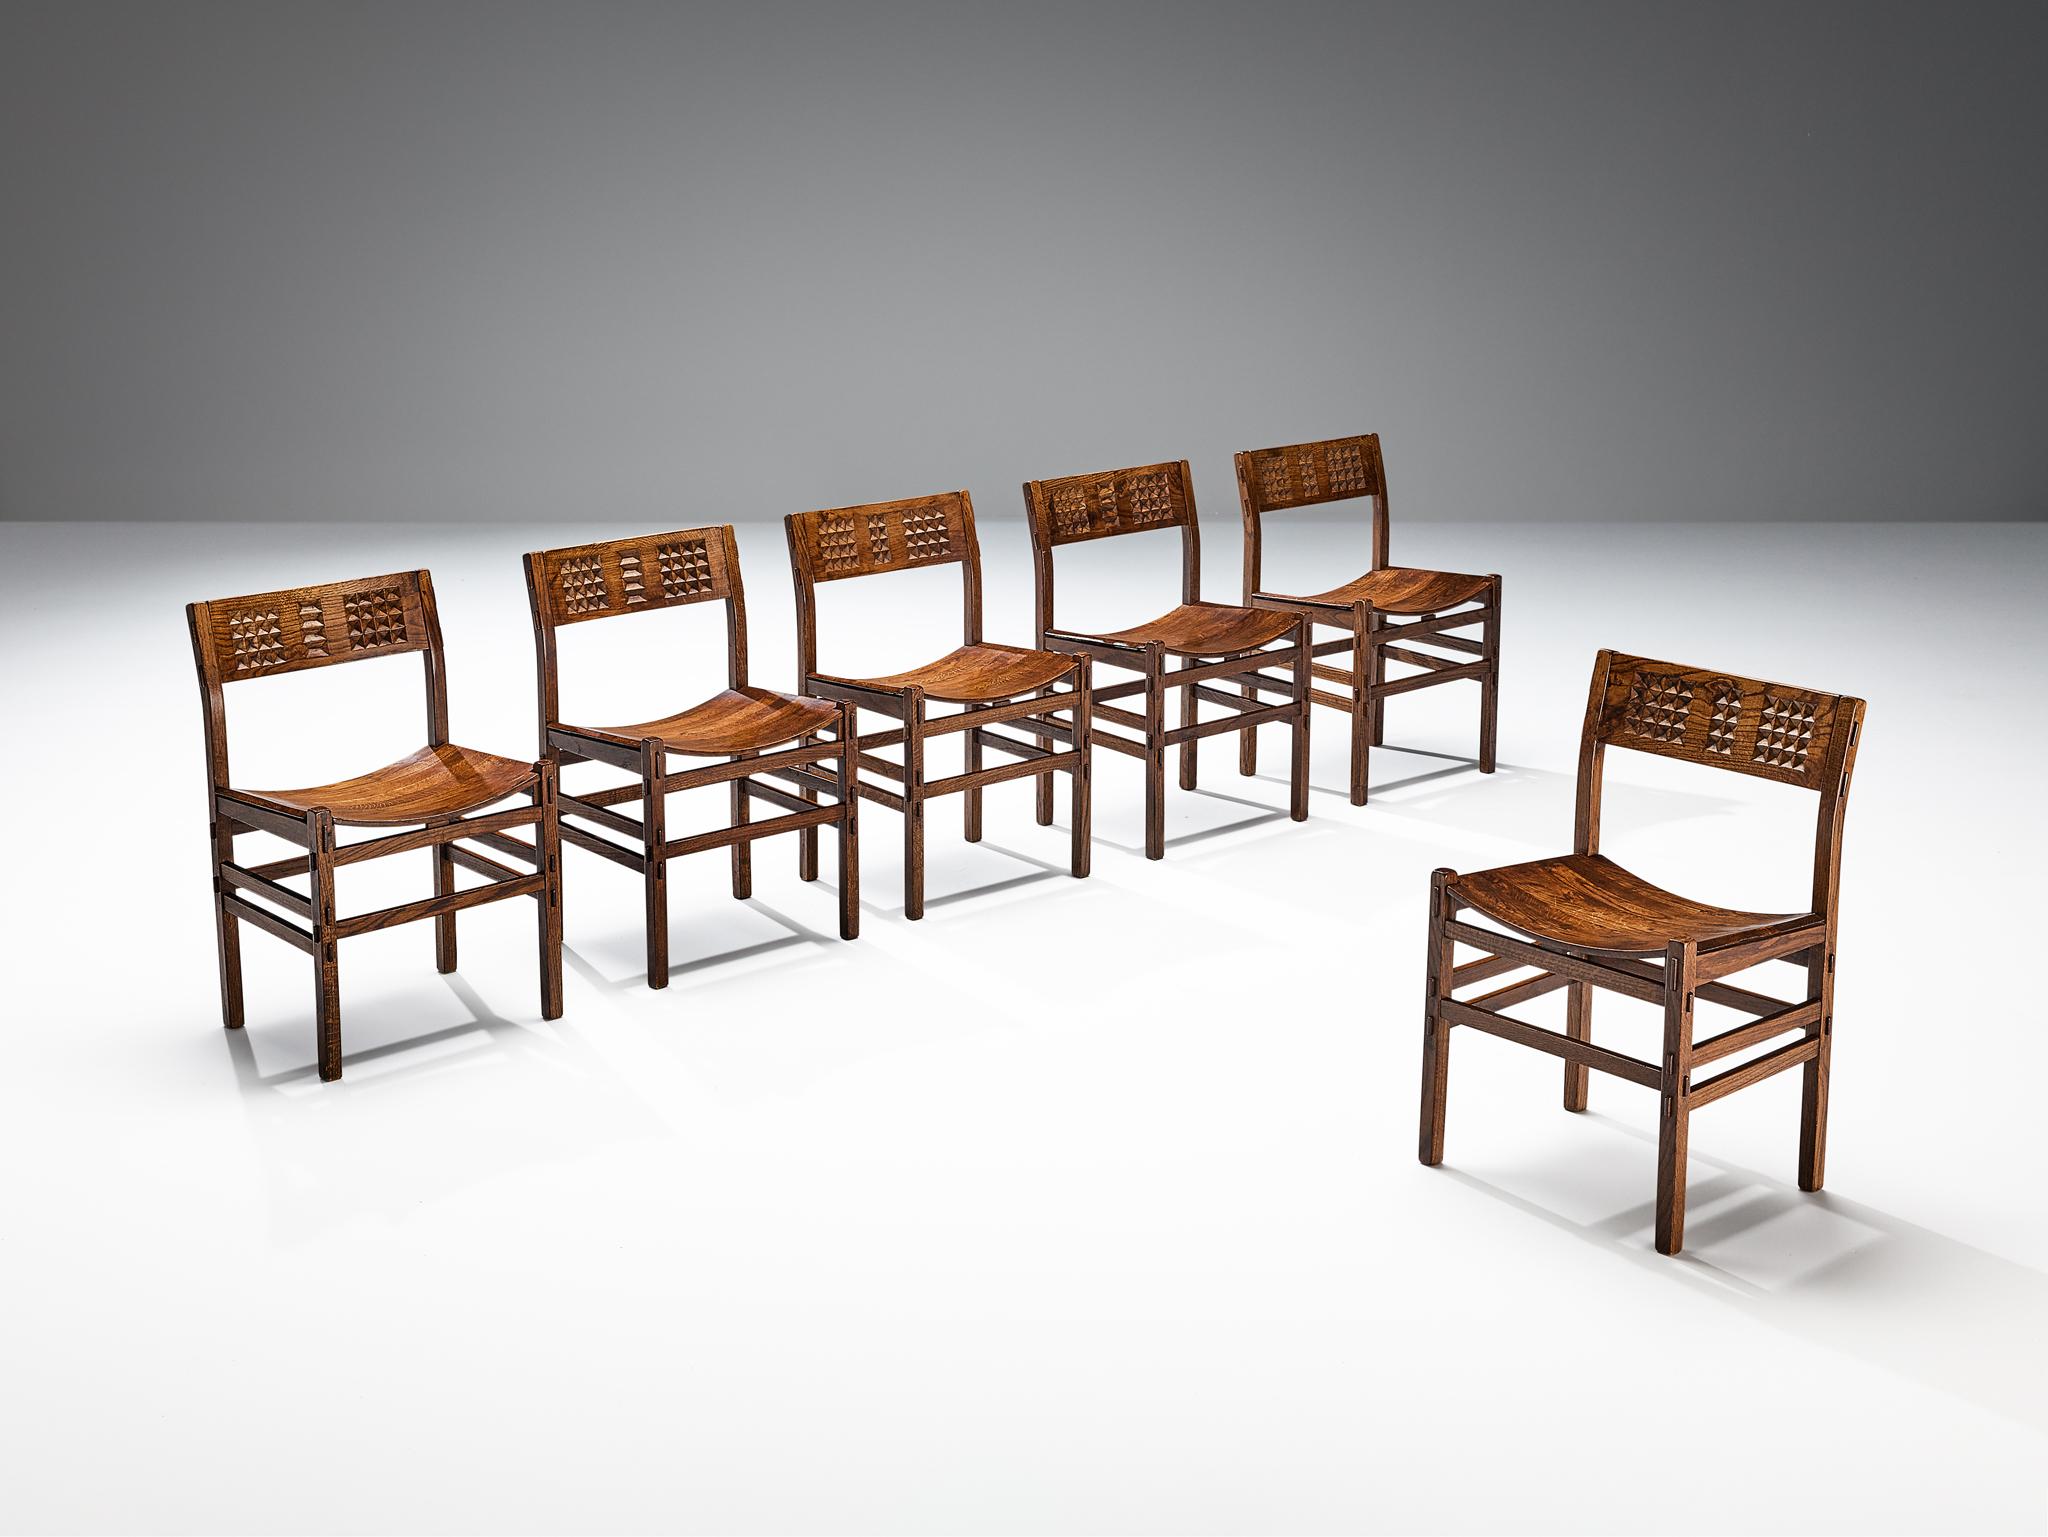 Set of six dining chairs, stained oak, Italy, 1970s.

Beautiful set of oak chairs with geometrical carved details in the backrests. The sides and backs of the frames of the chairs have multiple thin slats for support and stability in the design. The